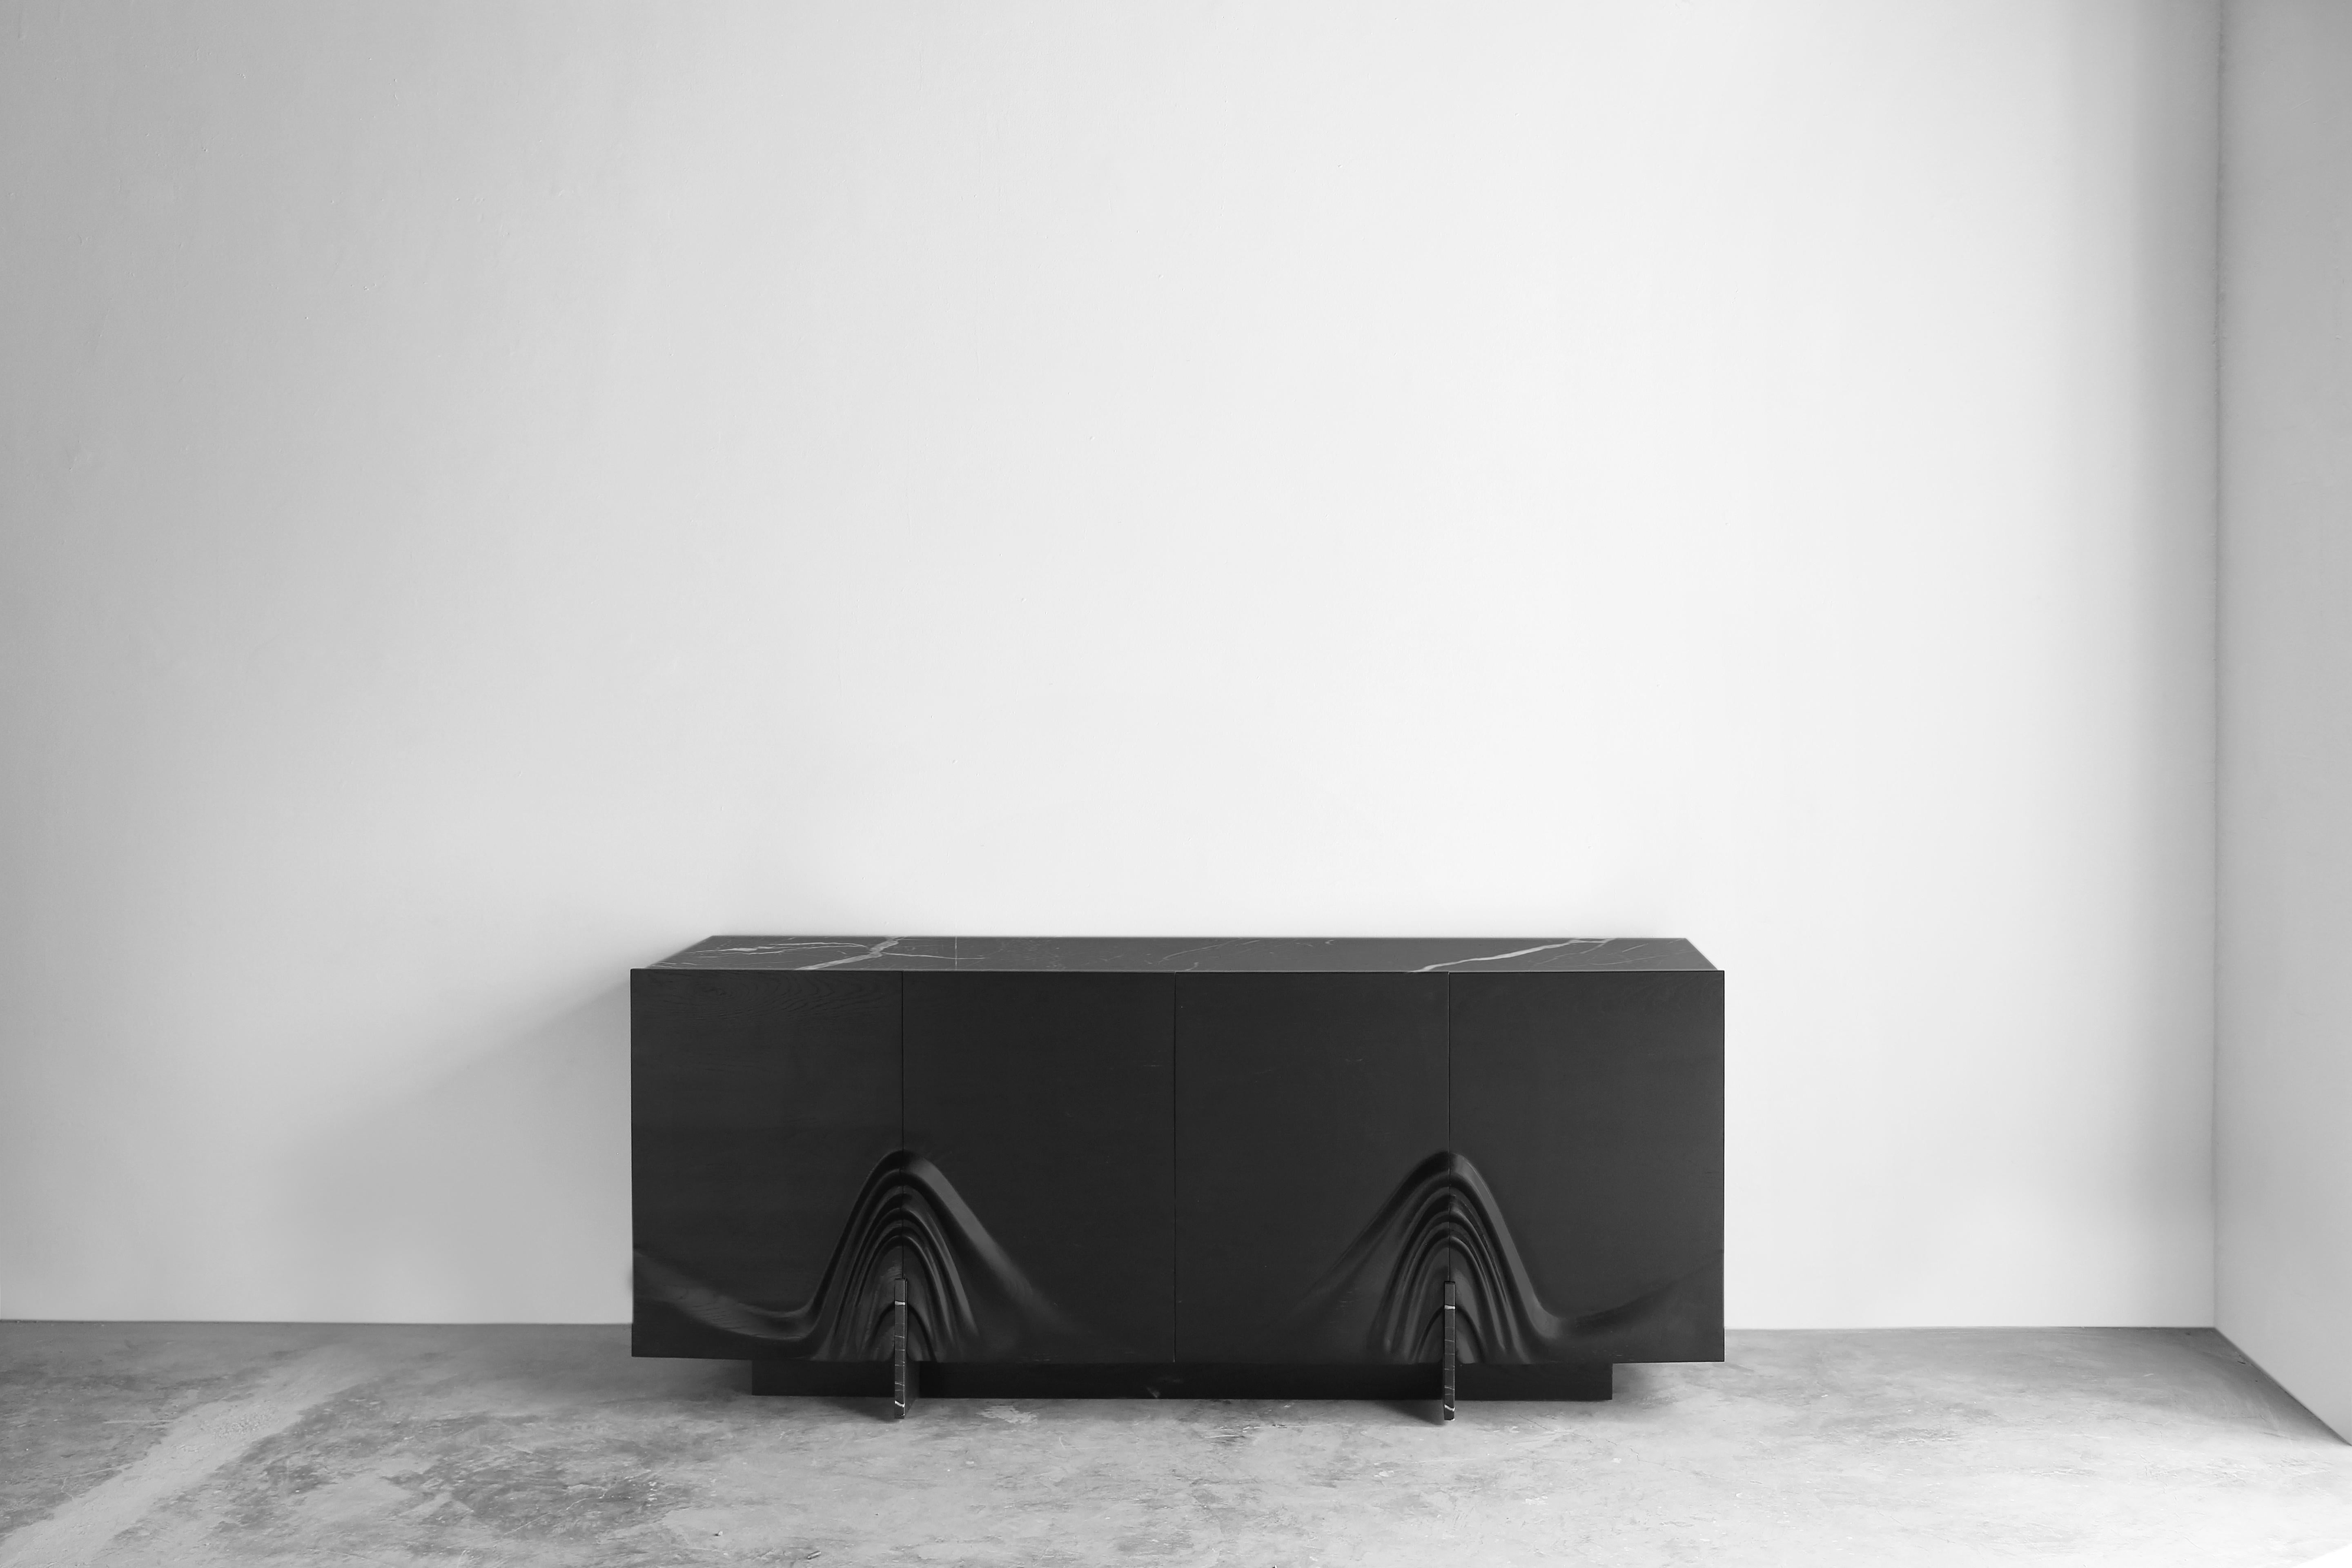 Gravedad sideboard by Joel Escalona
Limited Edition of 9
Dimensions: D 200 x W 80 x H 50 cm
Materials: oak wood, Petra Grey marble, steel.

Console made of solid burnt and tinted oak wood, pedestals and top surface in Petra Grey marble.